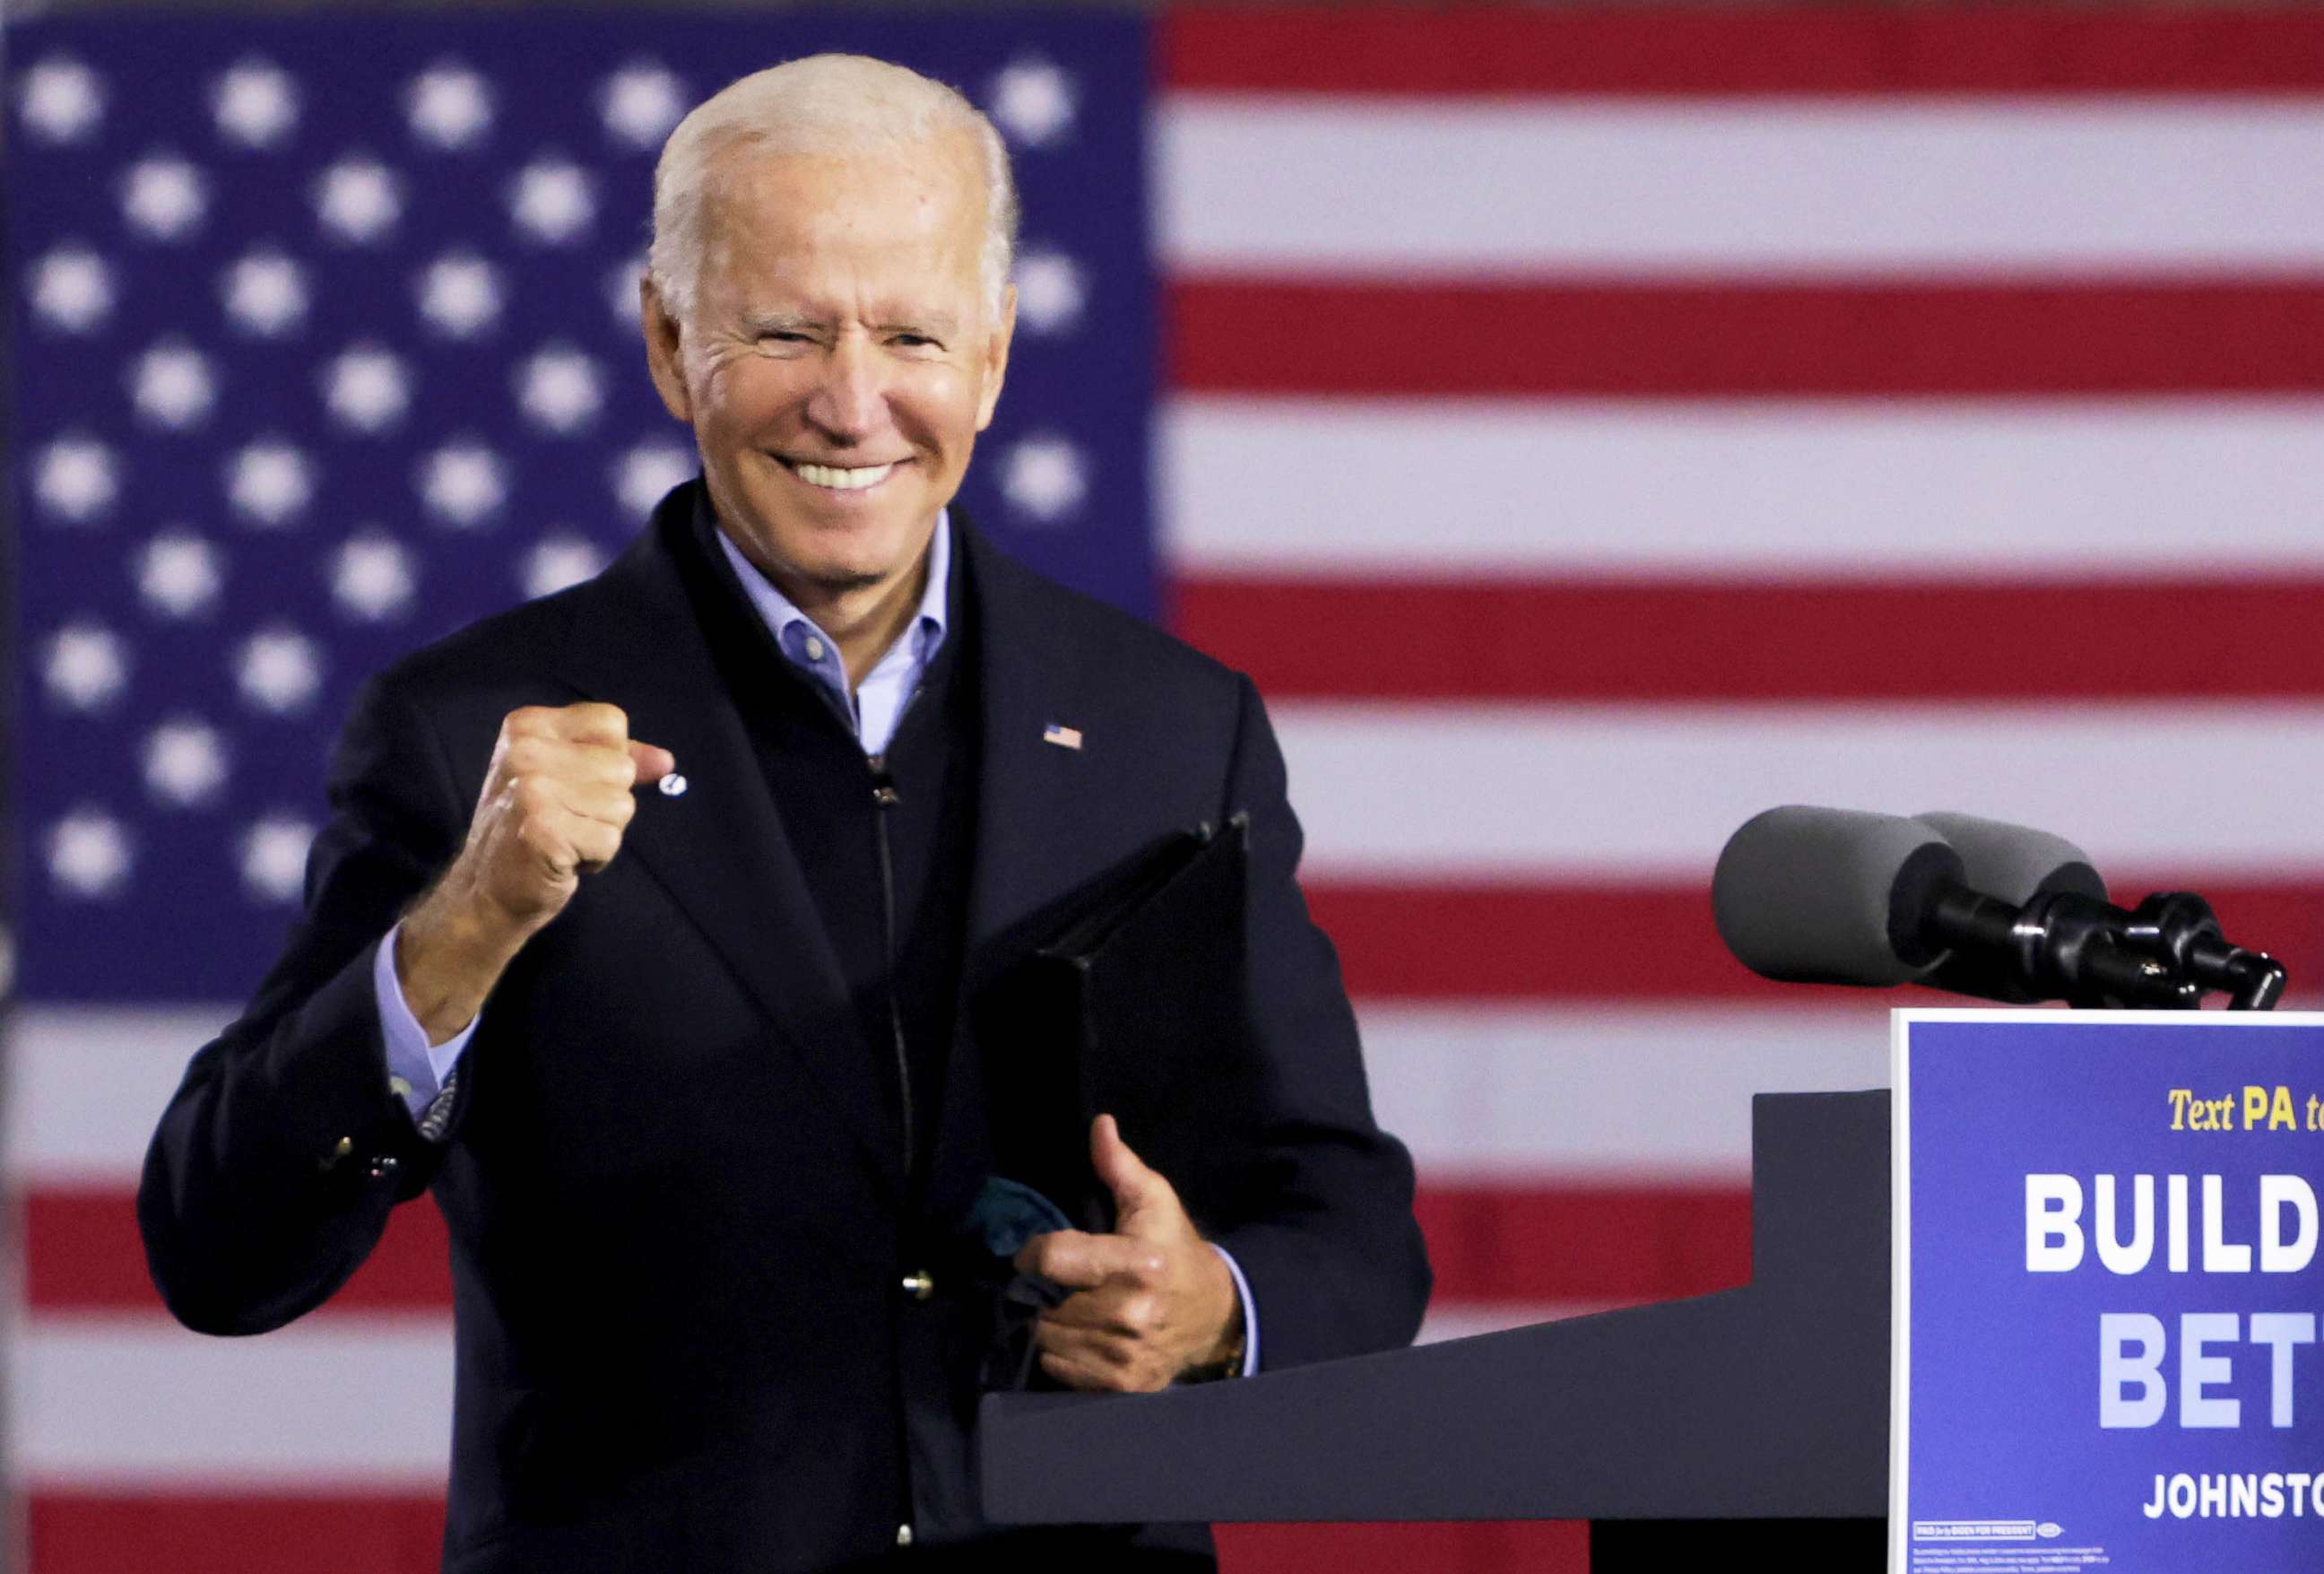 PHOTO: Democratic presidential nominee Joe Biden gestures during a campaign stop outside Johnstown Train Station in Johnstown, Penn., Sept. 30, 2020.